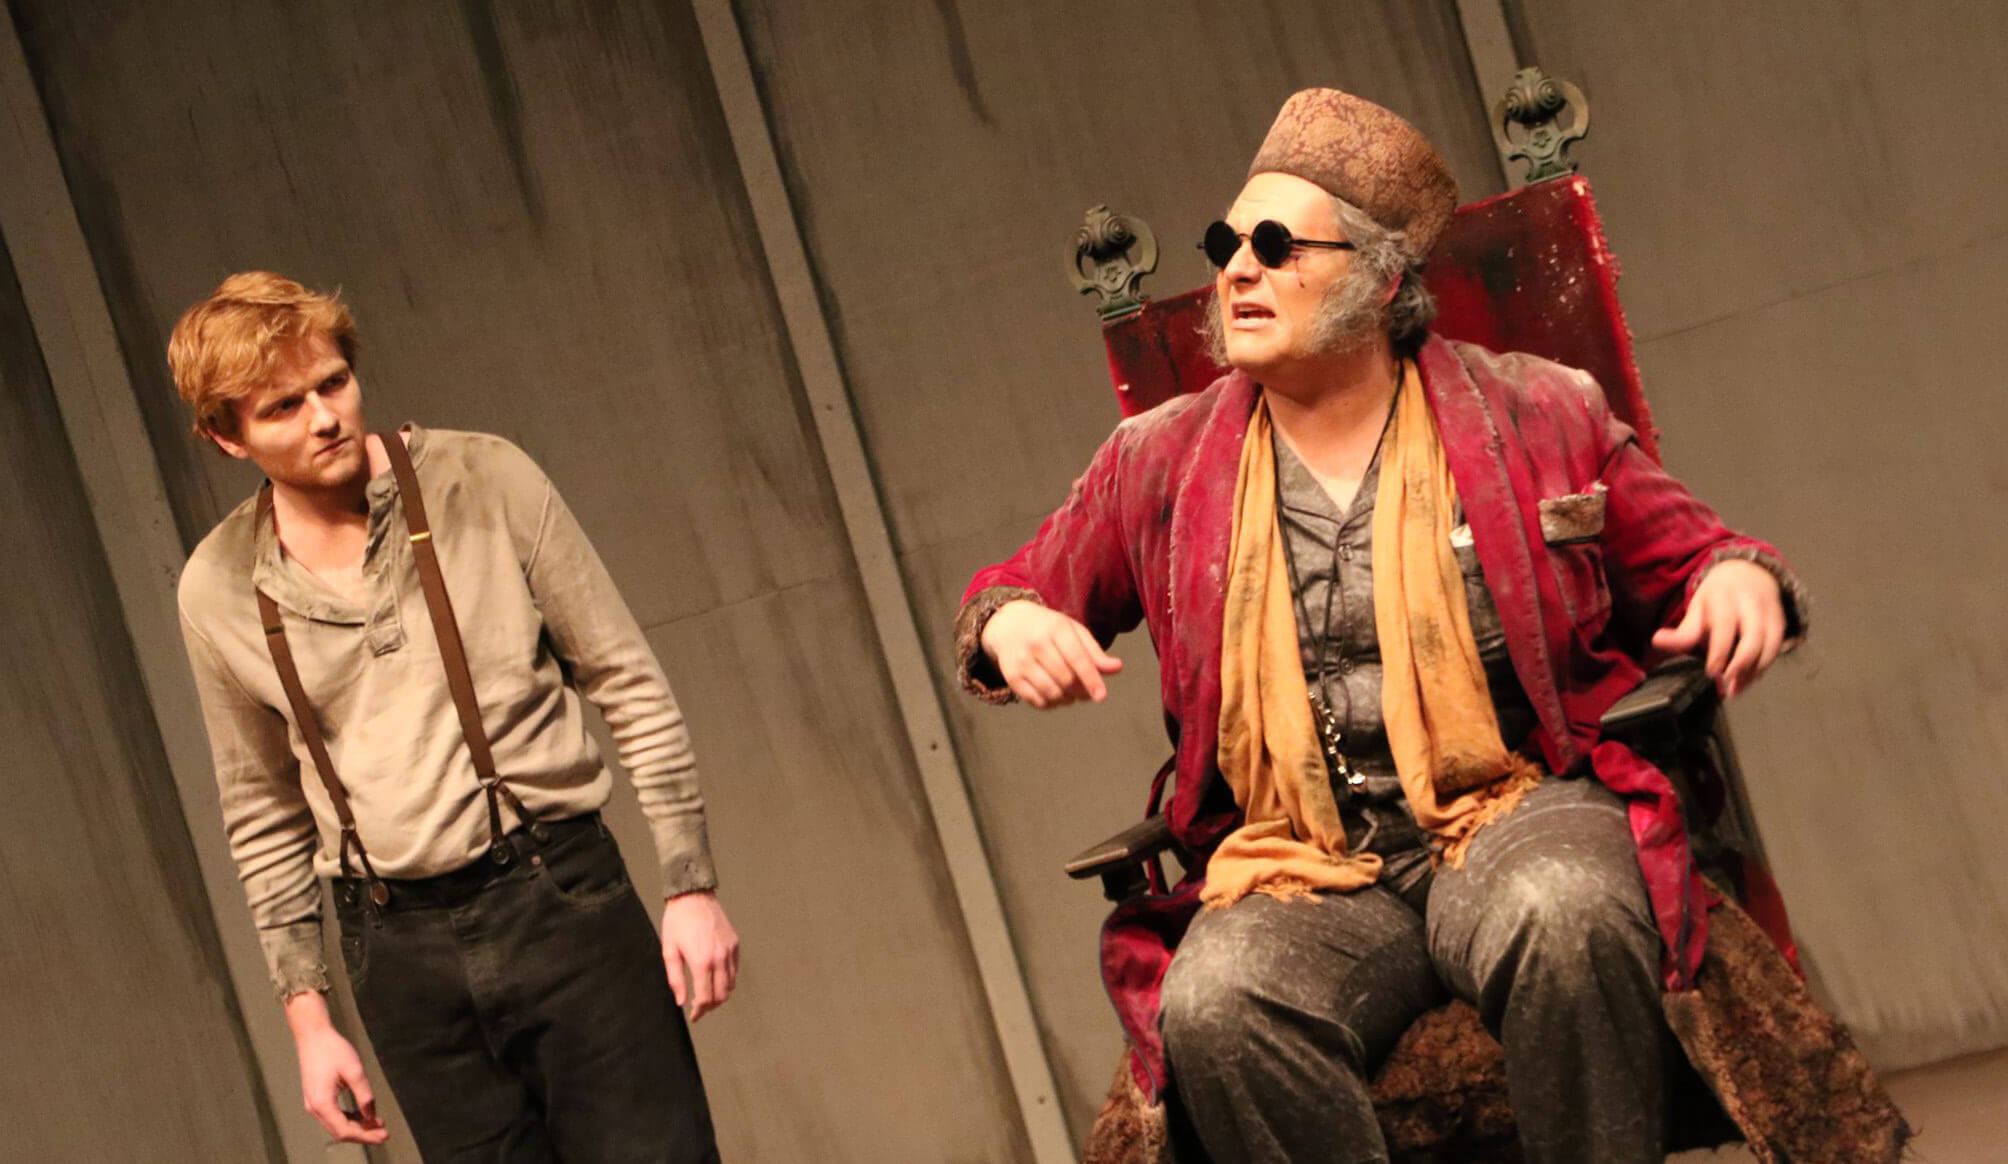 Gustavus Adolphus College production of Endgame by Samuel Beckett, 2016. Directed by Amy Seham. Actors in photo: Thomas Buan and Samuel Keillor. Photo by Wikimedia Commons user Aberbic94, CC BY-SA 4.0 Pedagogy